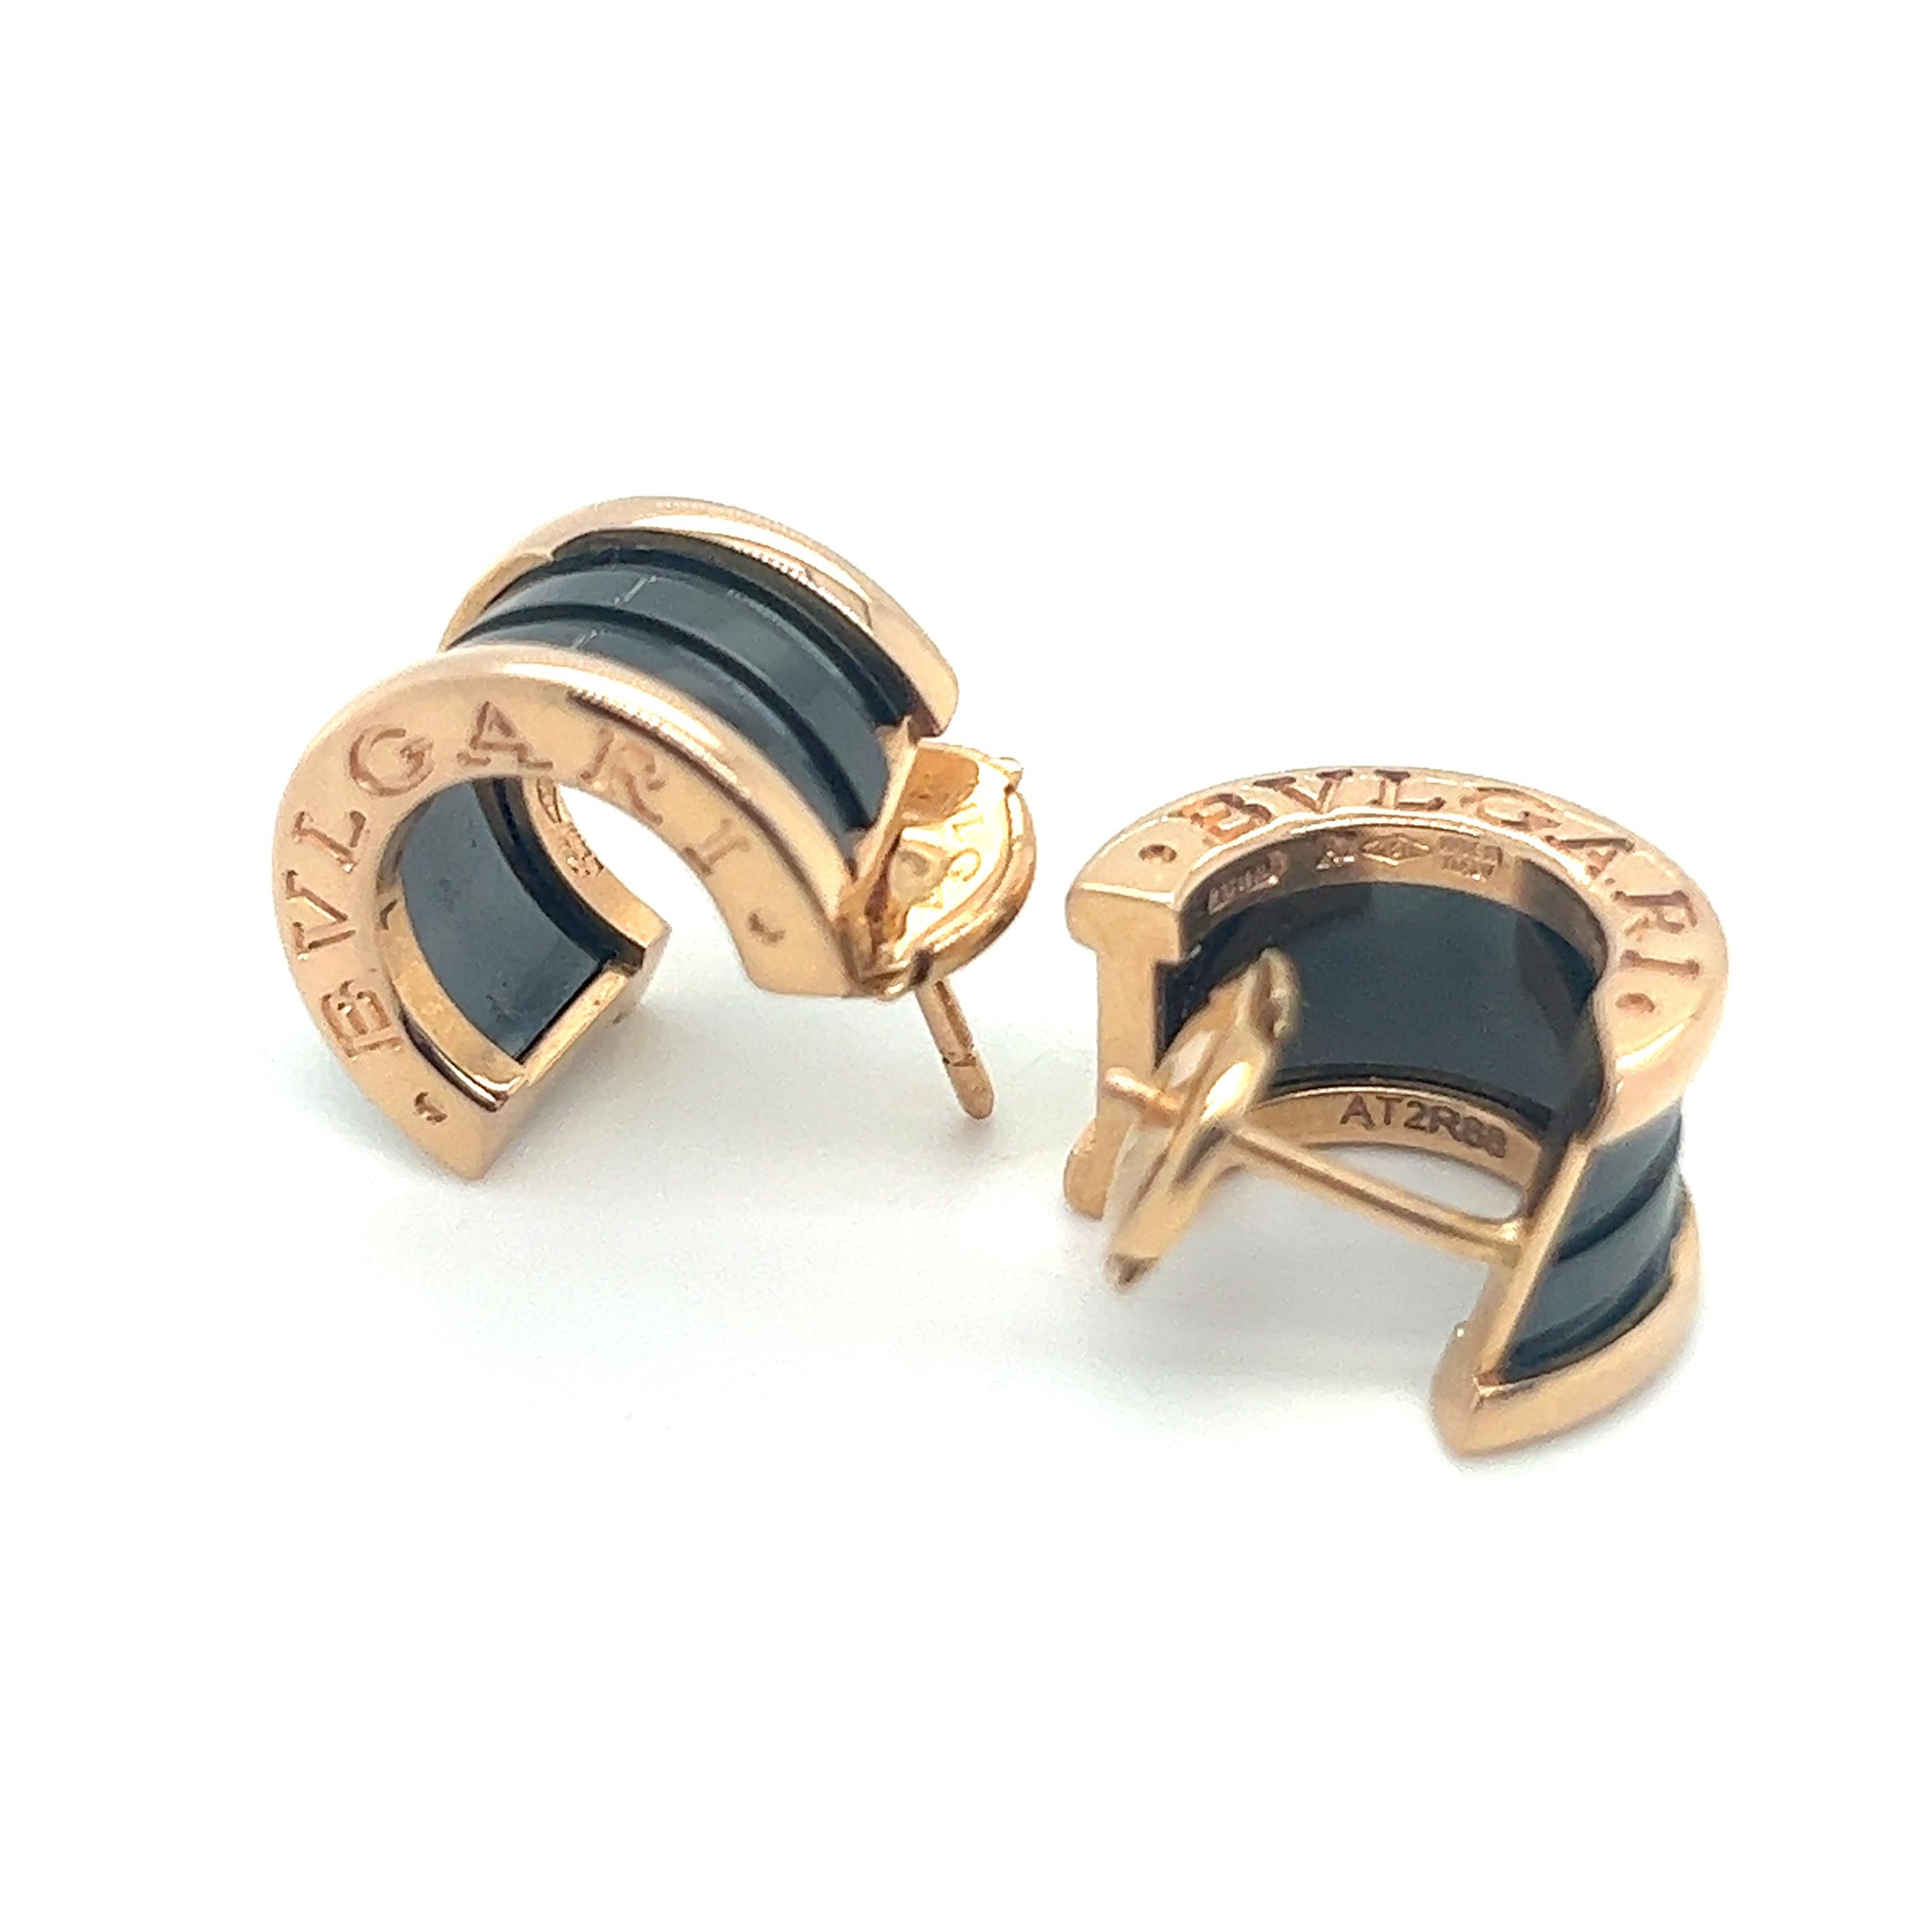 Bulgari B-Zero rose gold with black ceramic, these contemporary earrings are a classic must have for and Bvlgari collector. 

The earrings draw their inspiration from the most renowned amphitheater of the world, the Colosseum, the B.zero1 earrings